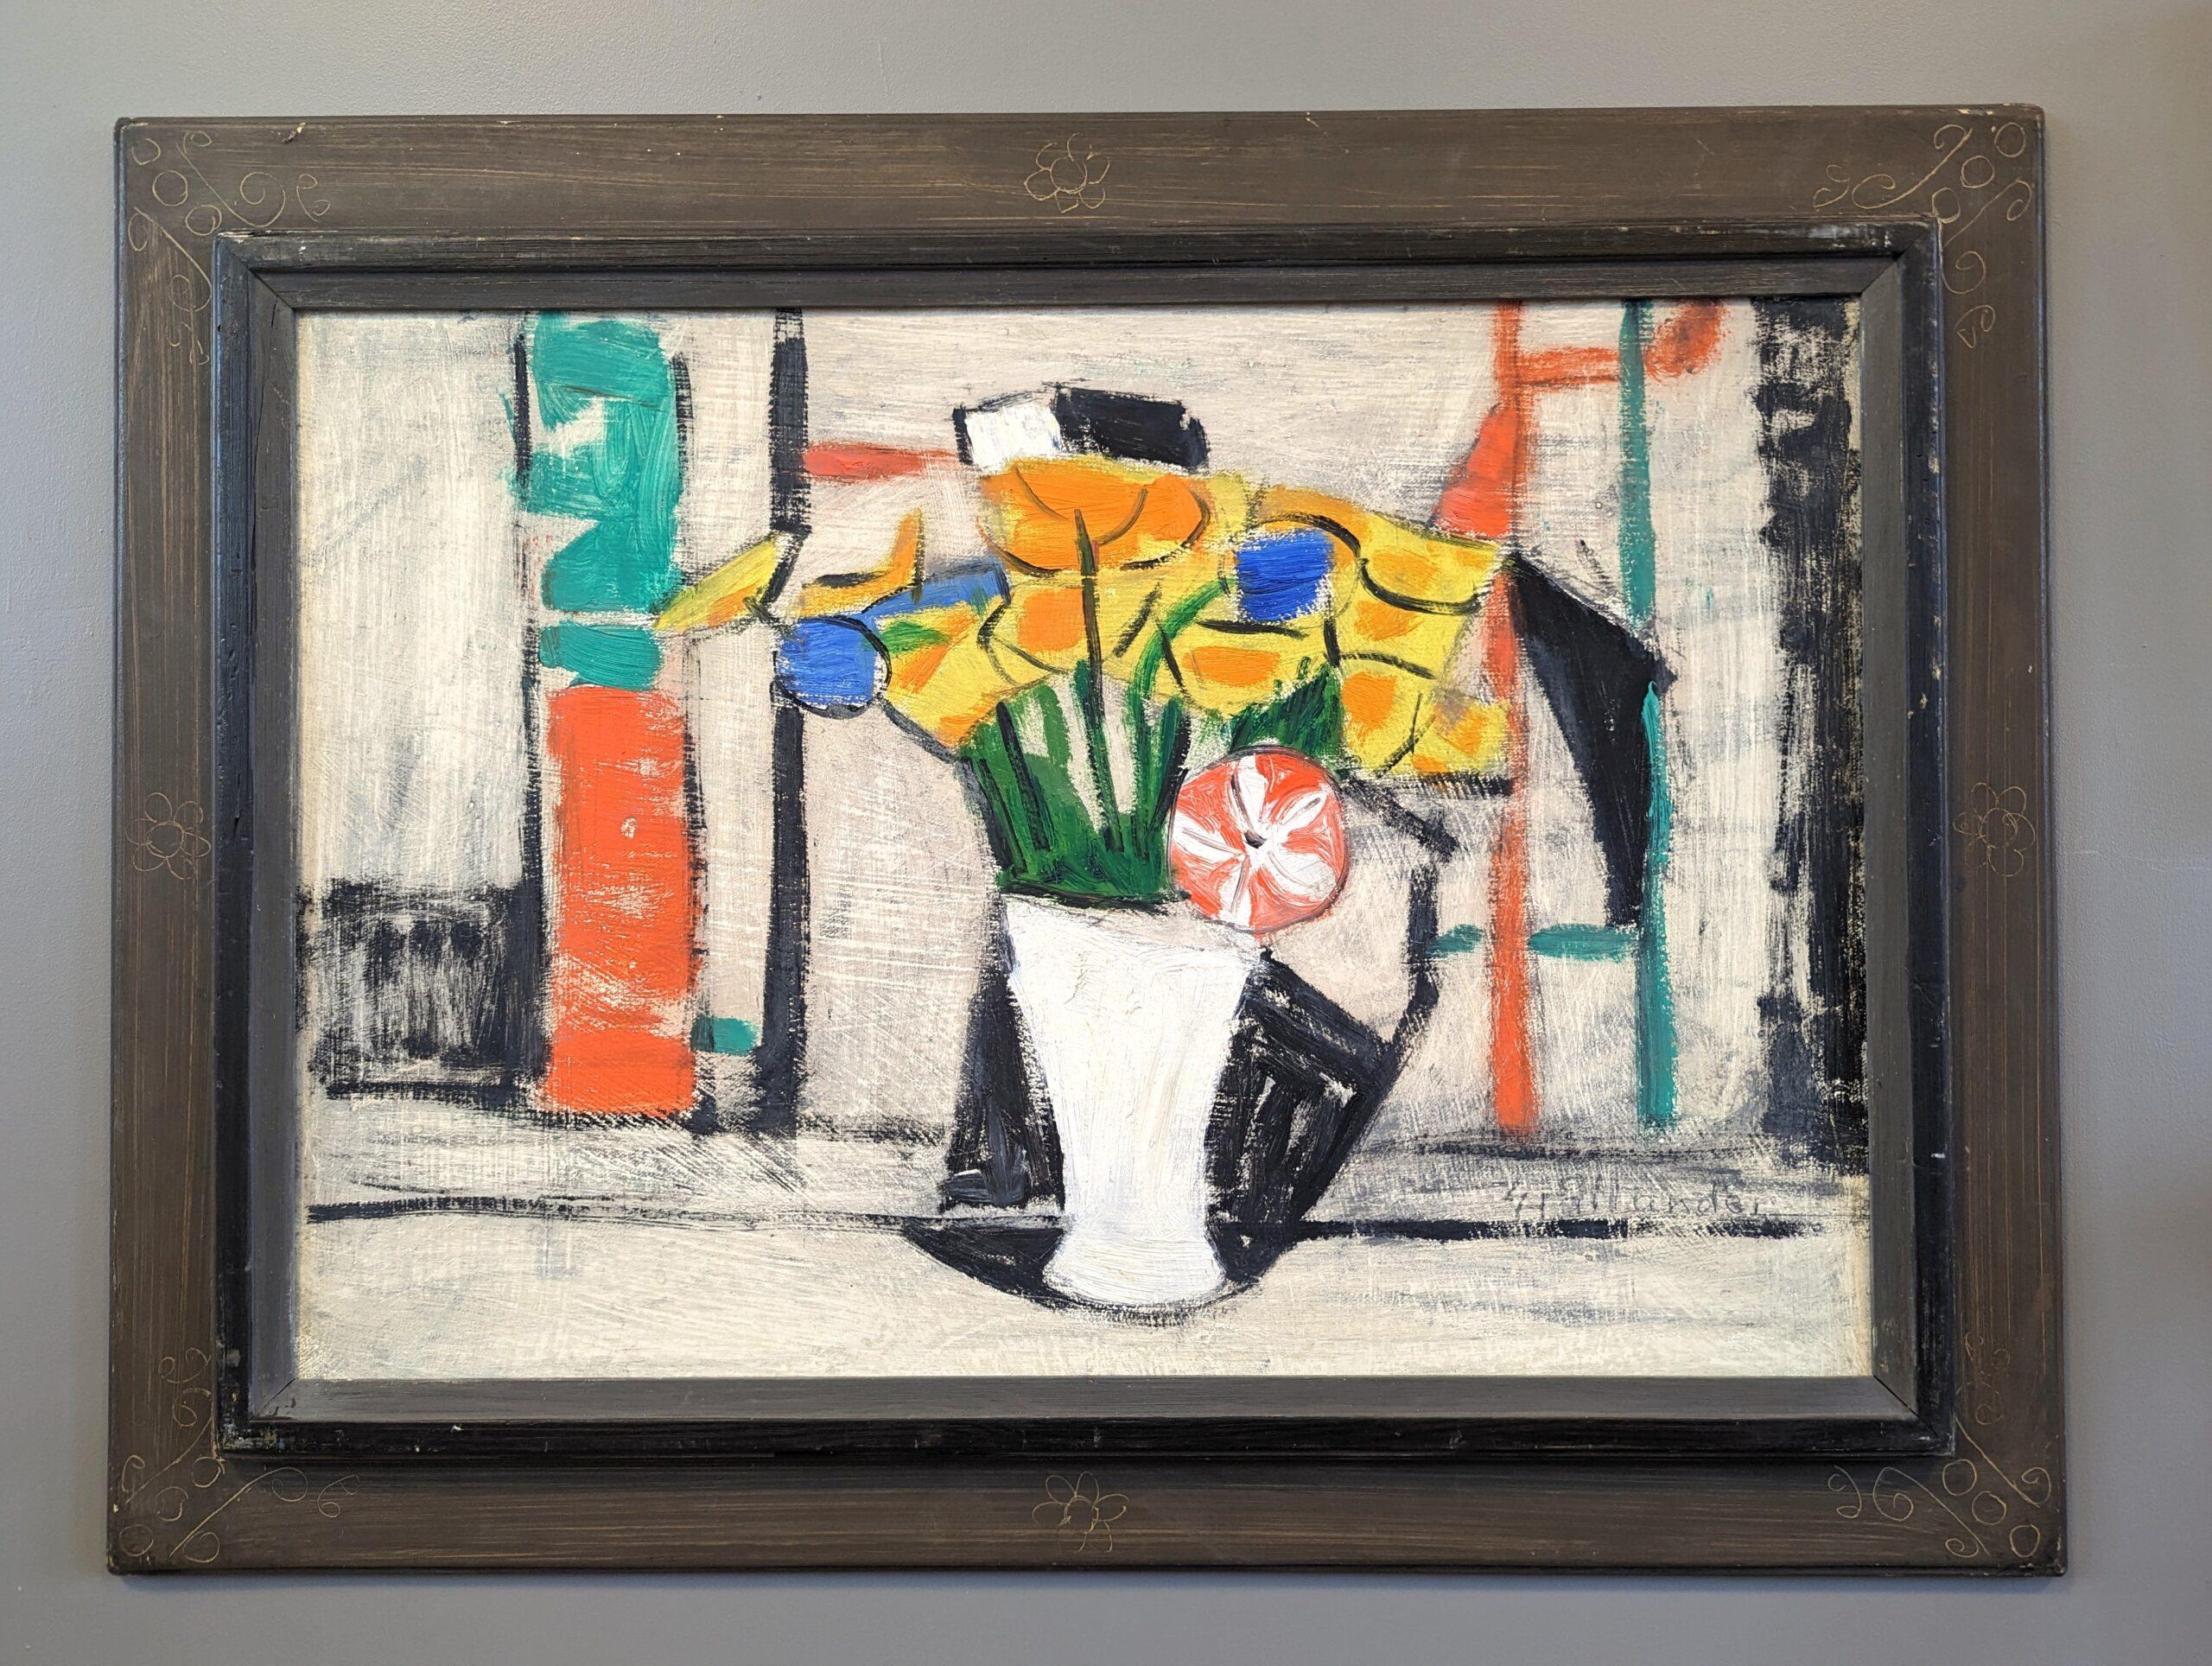 THE BOUQUET
Oil on Board
Size: 51.5 x 68 cm (including frame)

A very unique and vivid mid-century semi-abstract oil composition, painted on board and dated 1964 on the reverse.

In this composition we see a vase of flowers which have been painted